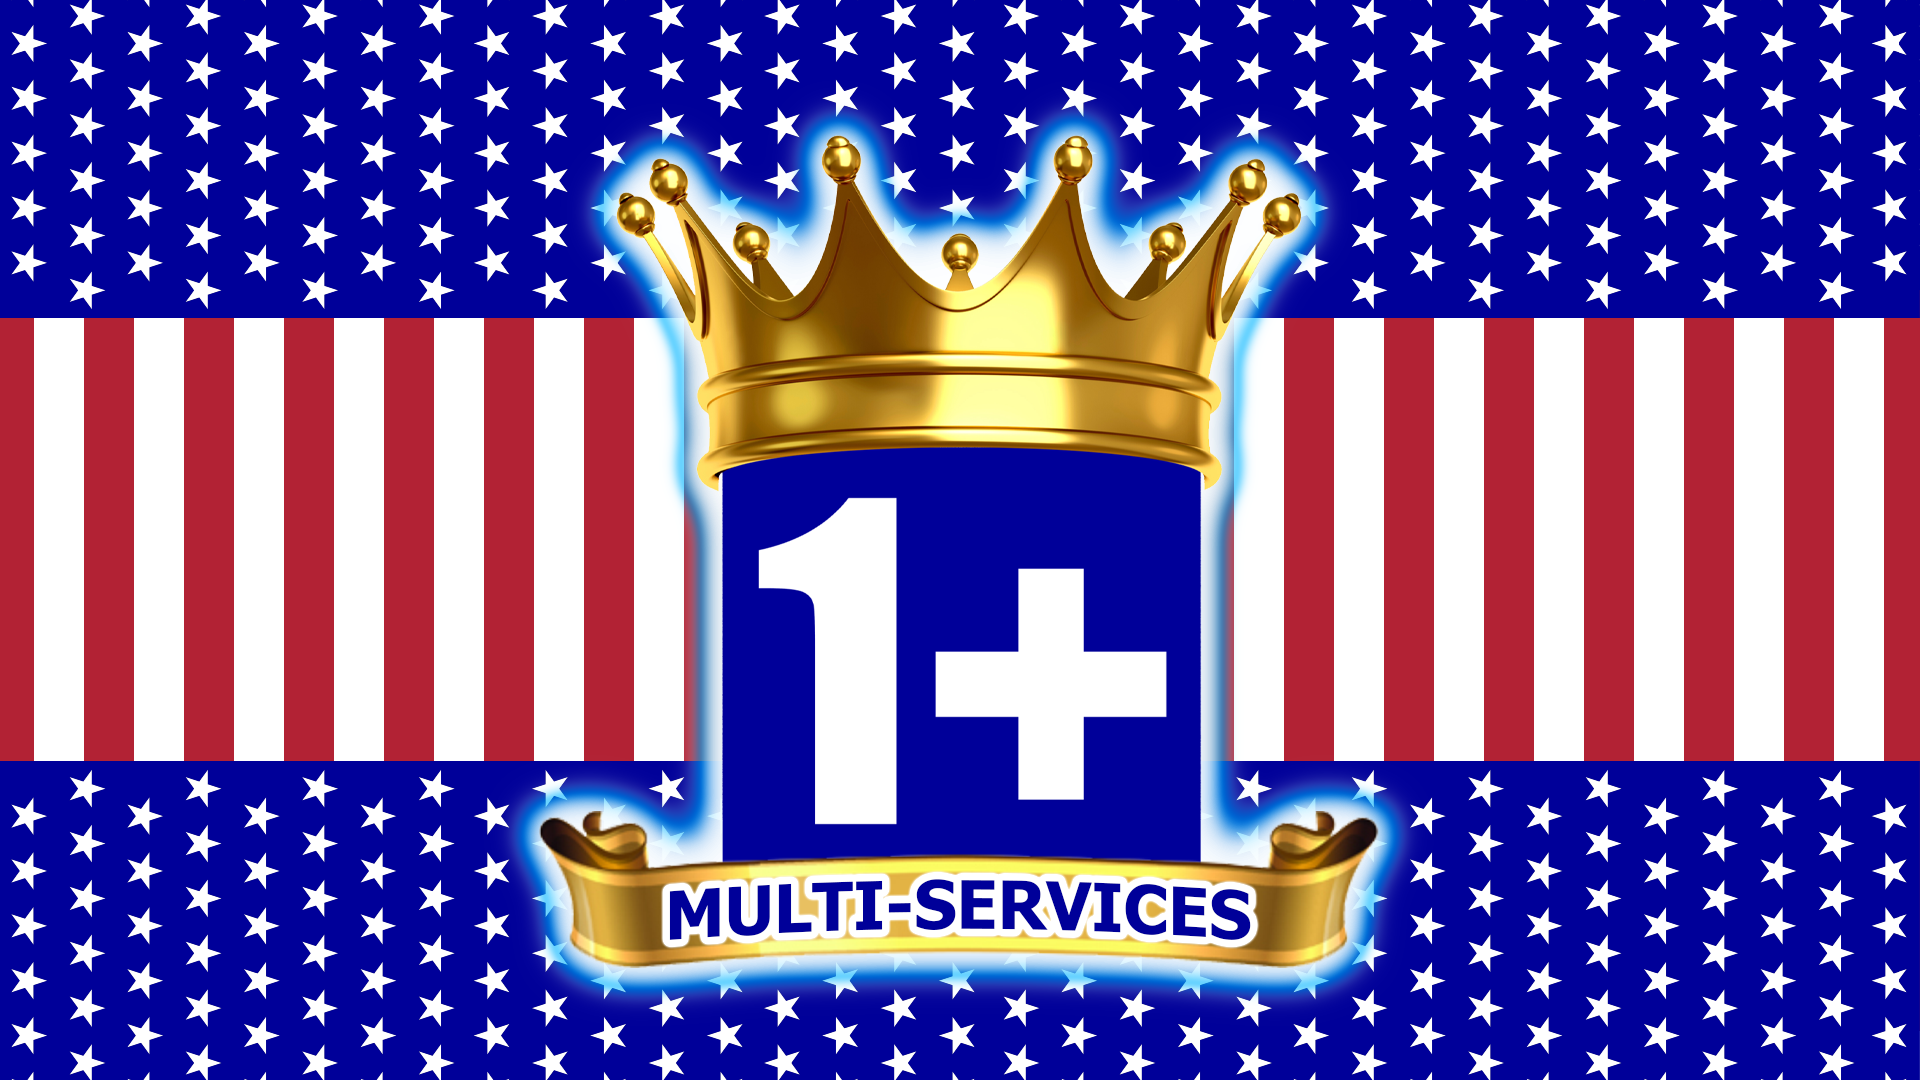 God Bless America And 1+ Multi Services - Home Services - Cleaning - Lawn Care - Painting - Home Repairs - Property Maintenance